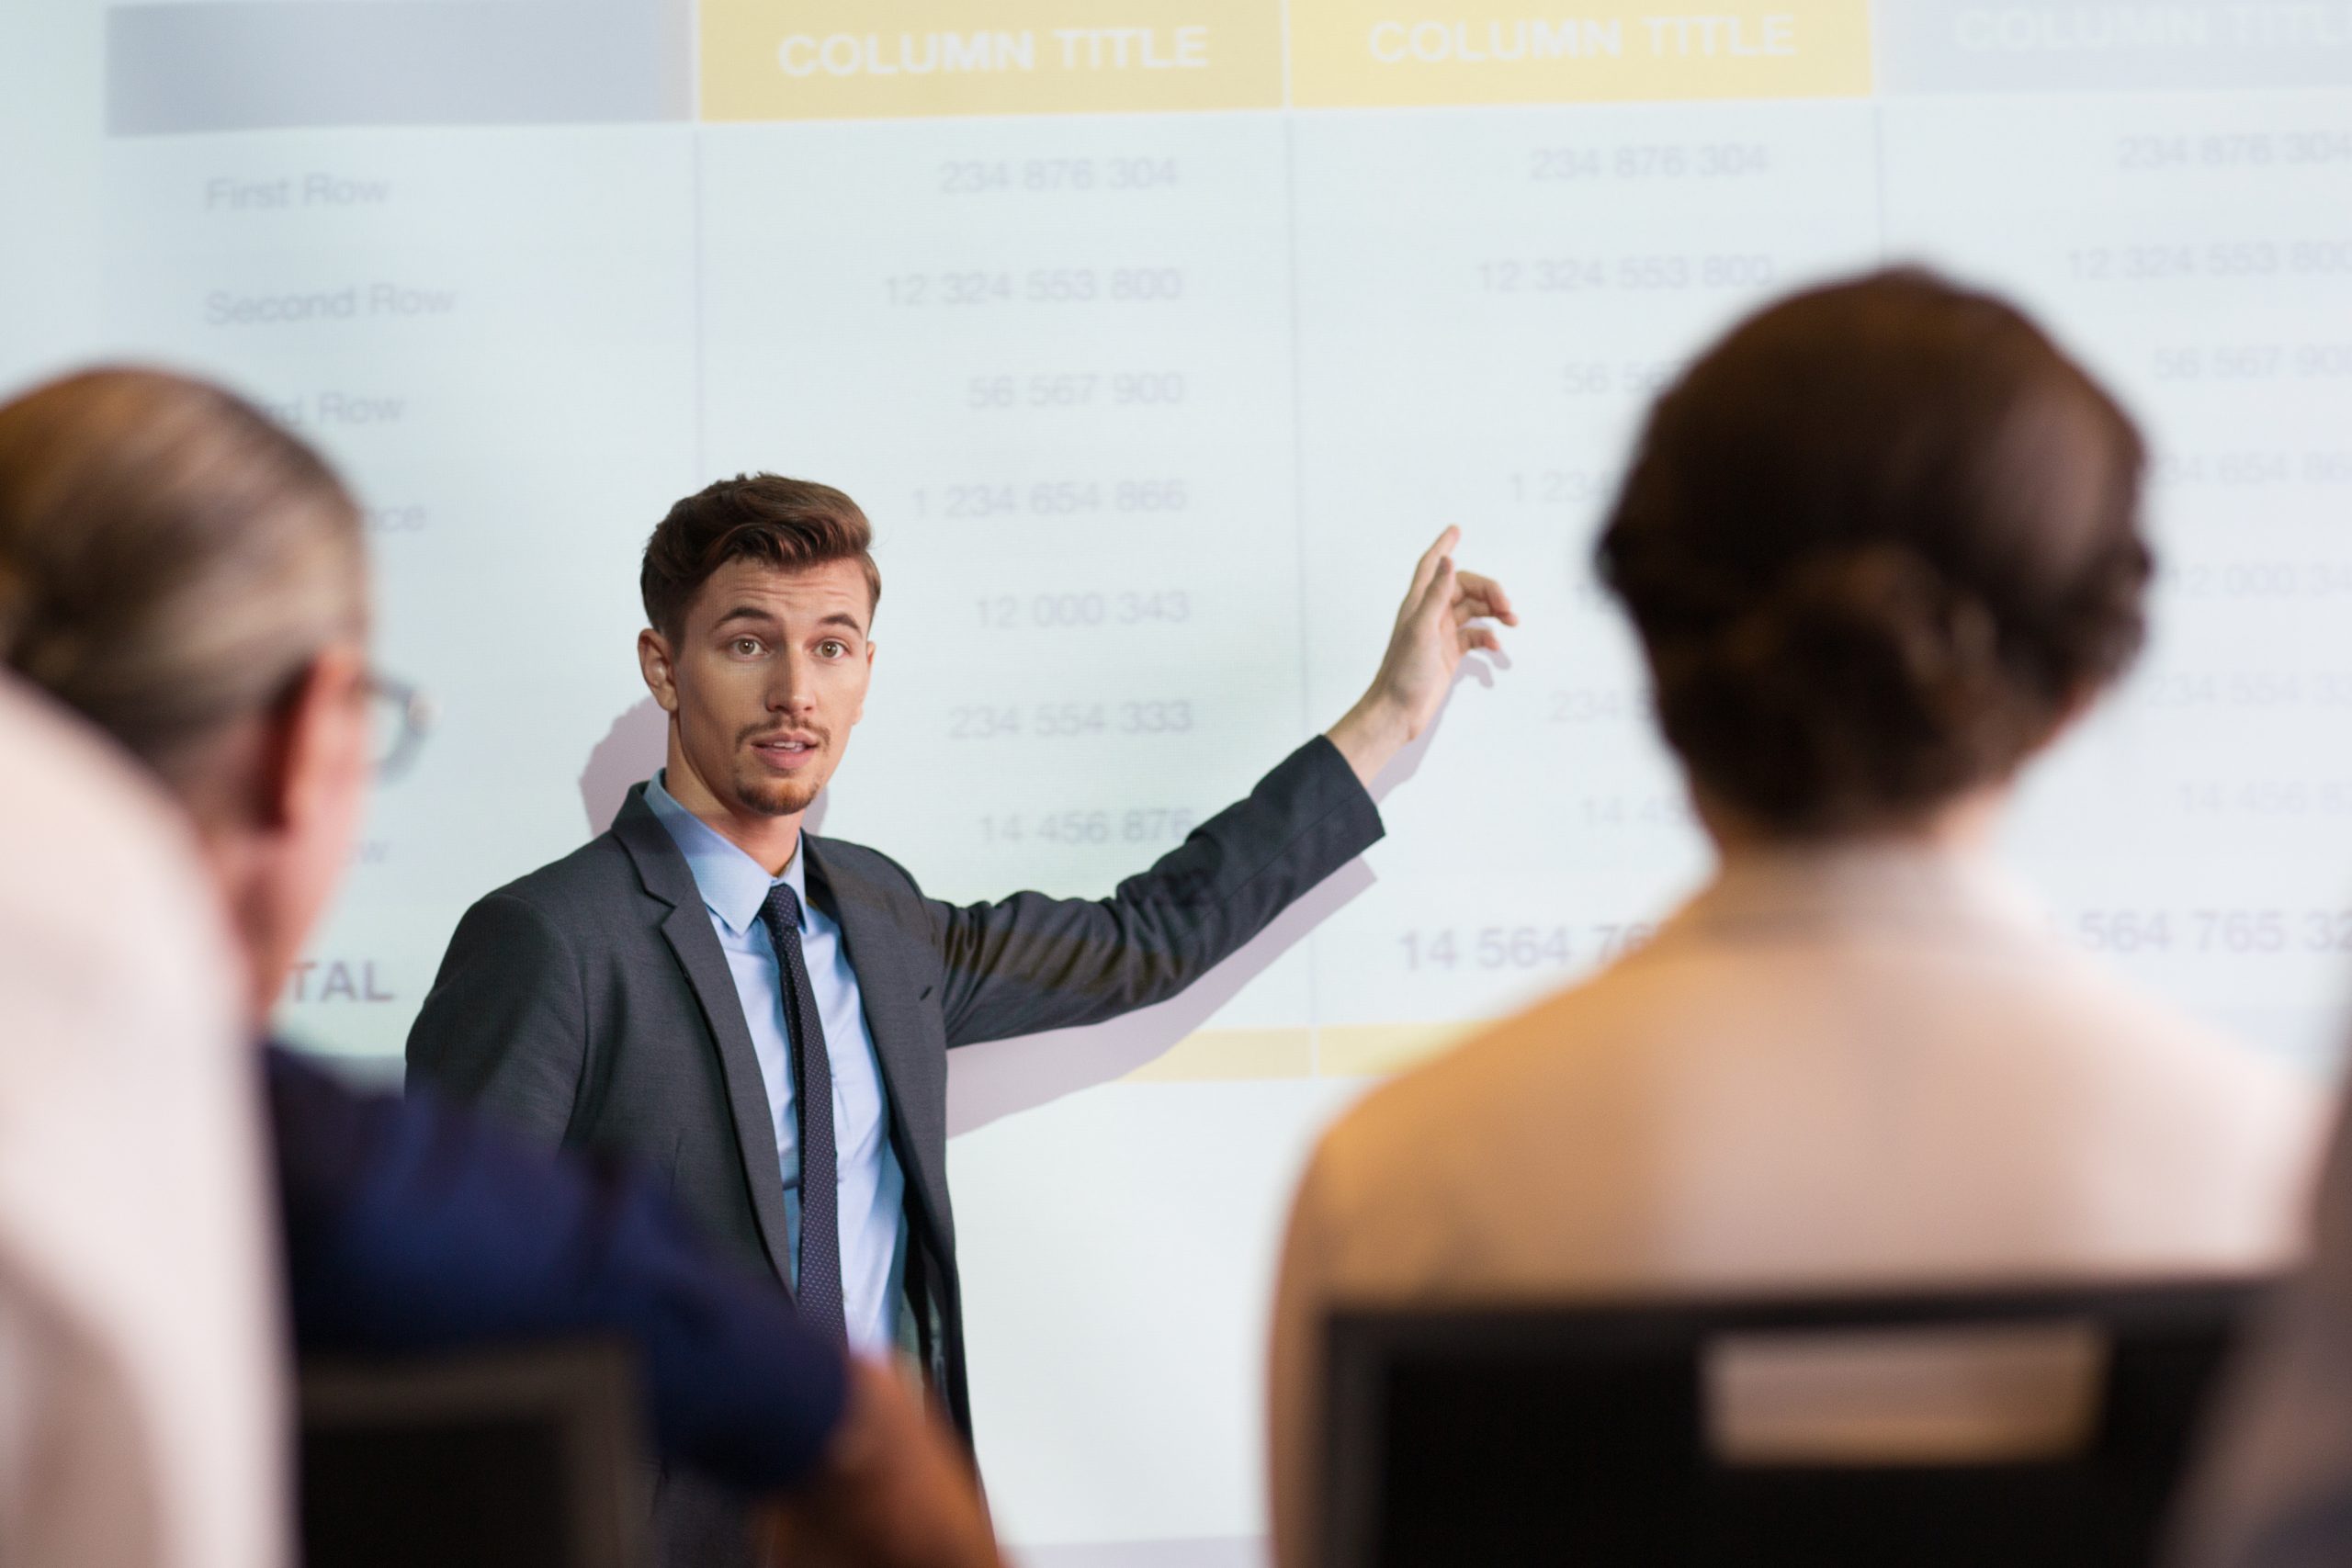 Serious middle-aged businessman standing at projection screen with table and pointing to it while looking and explaining ideas to audience seen partly